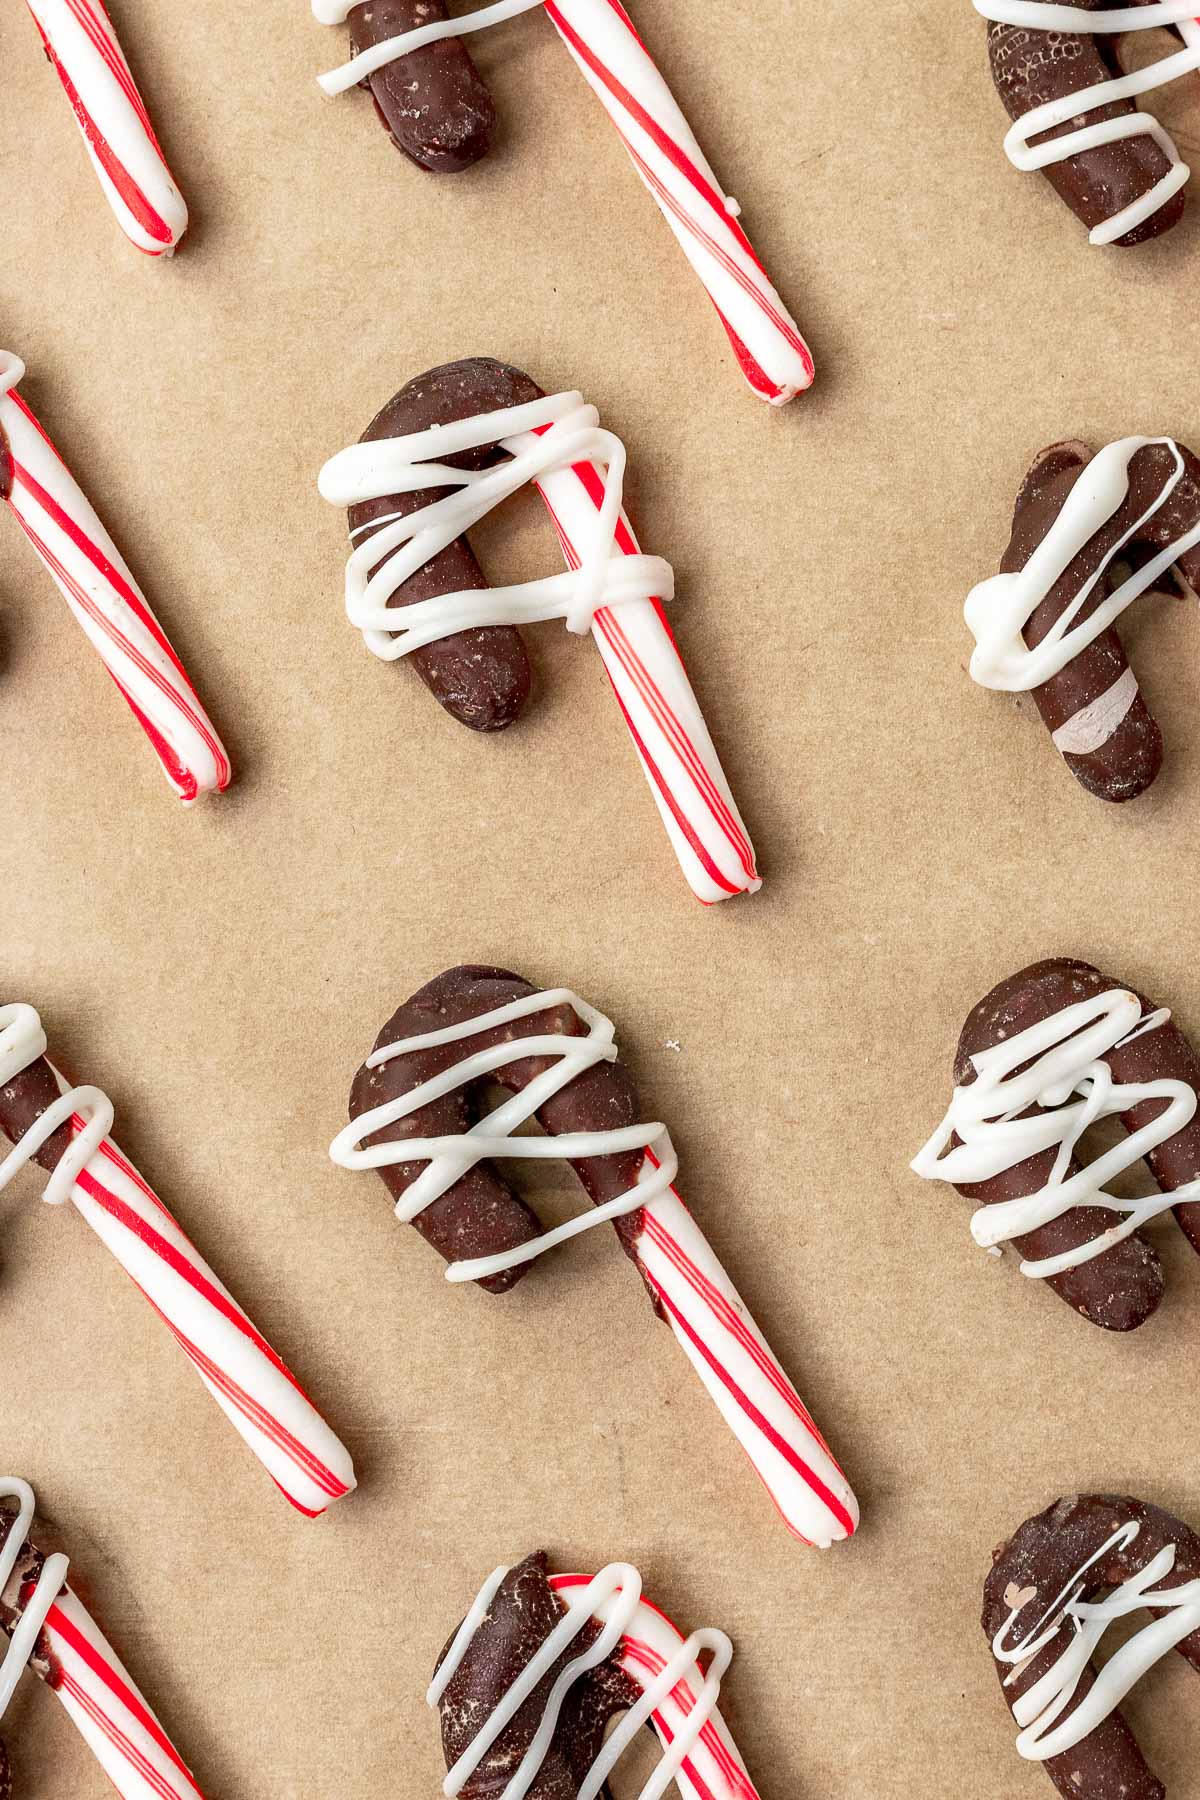 Chocolate Dipped Candy Canes on cookie sheet